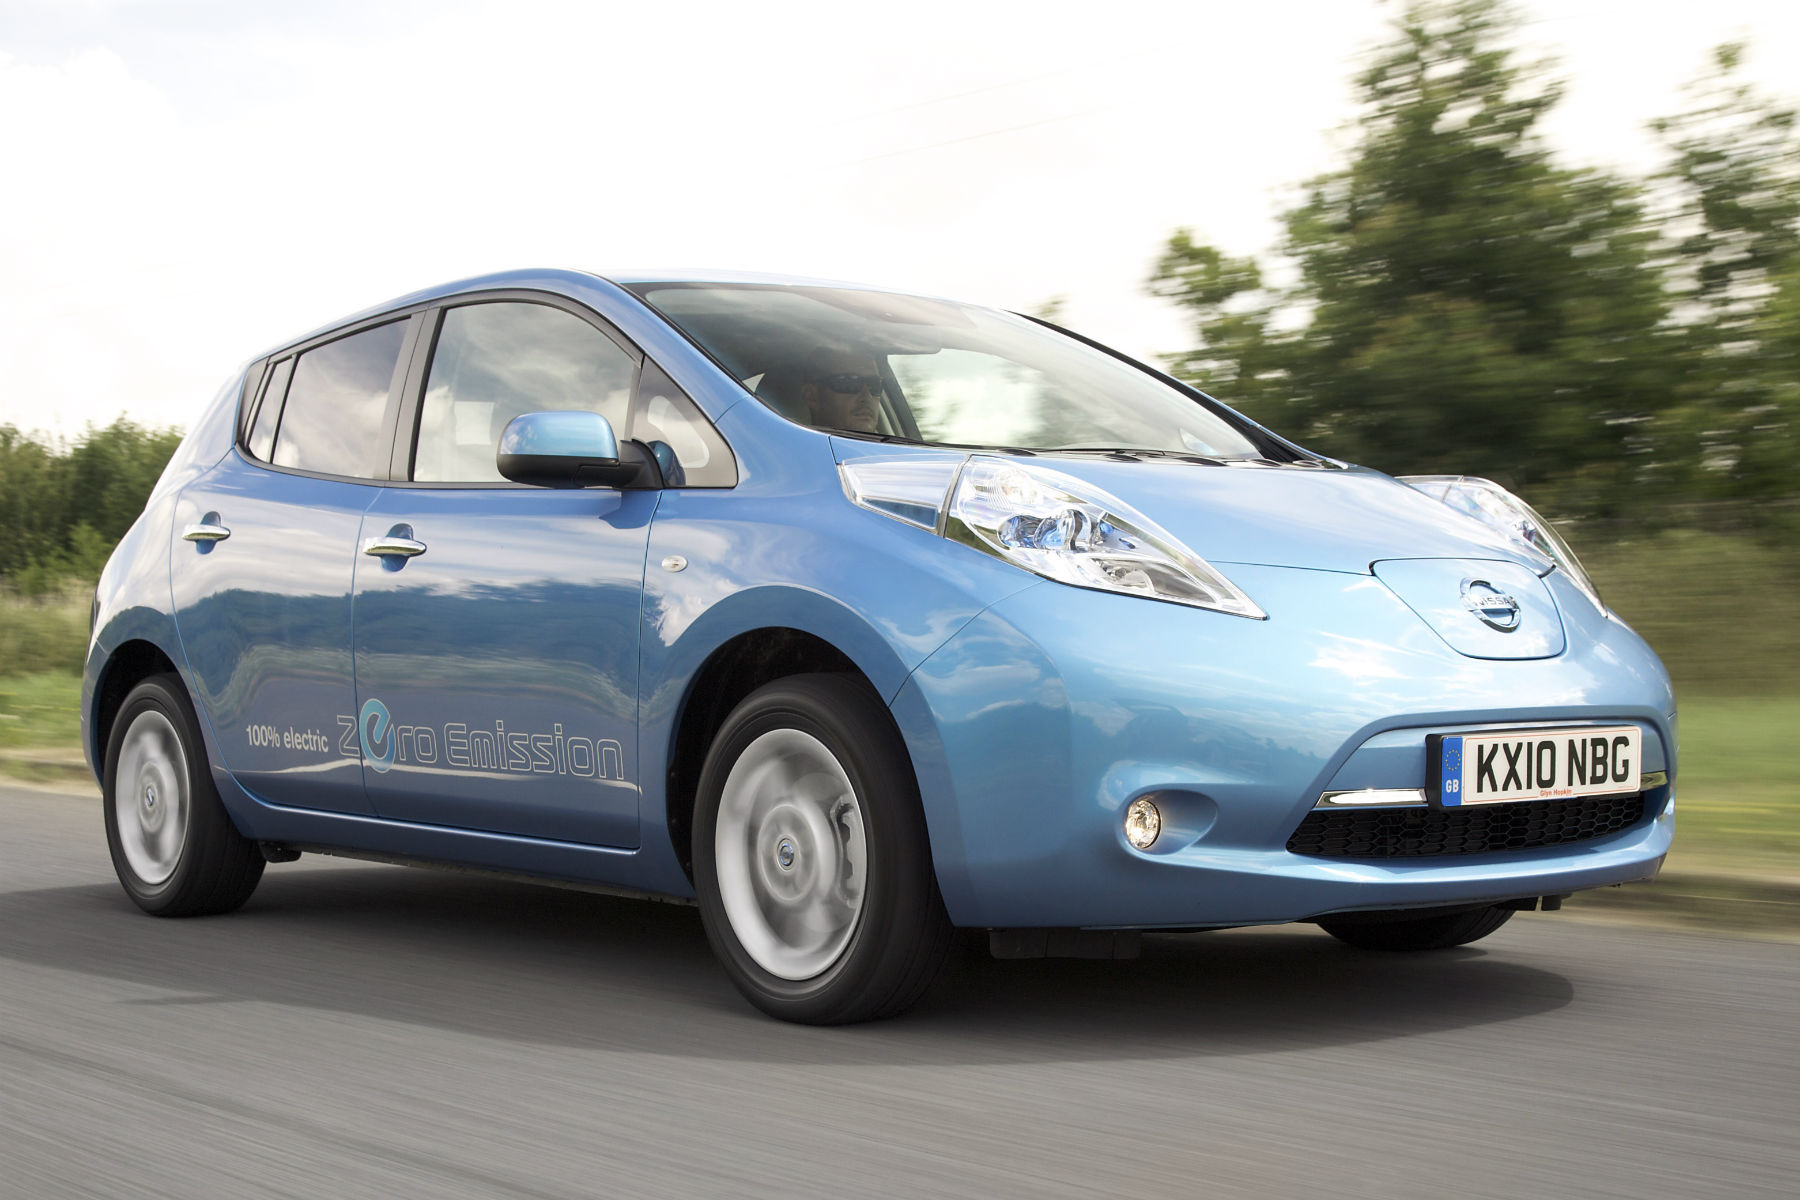 Used electric car searches up 680% on day of 2040 announcement